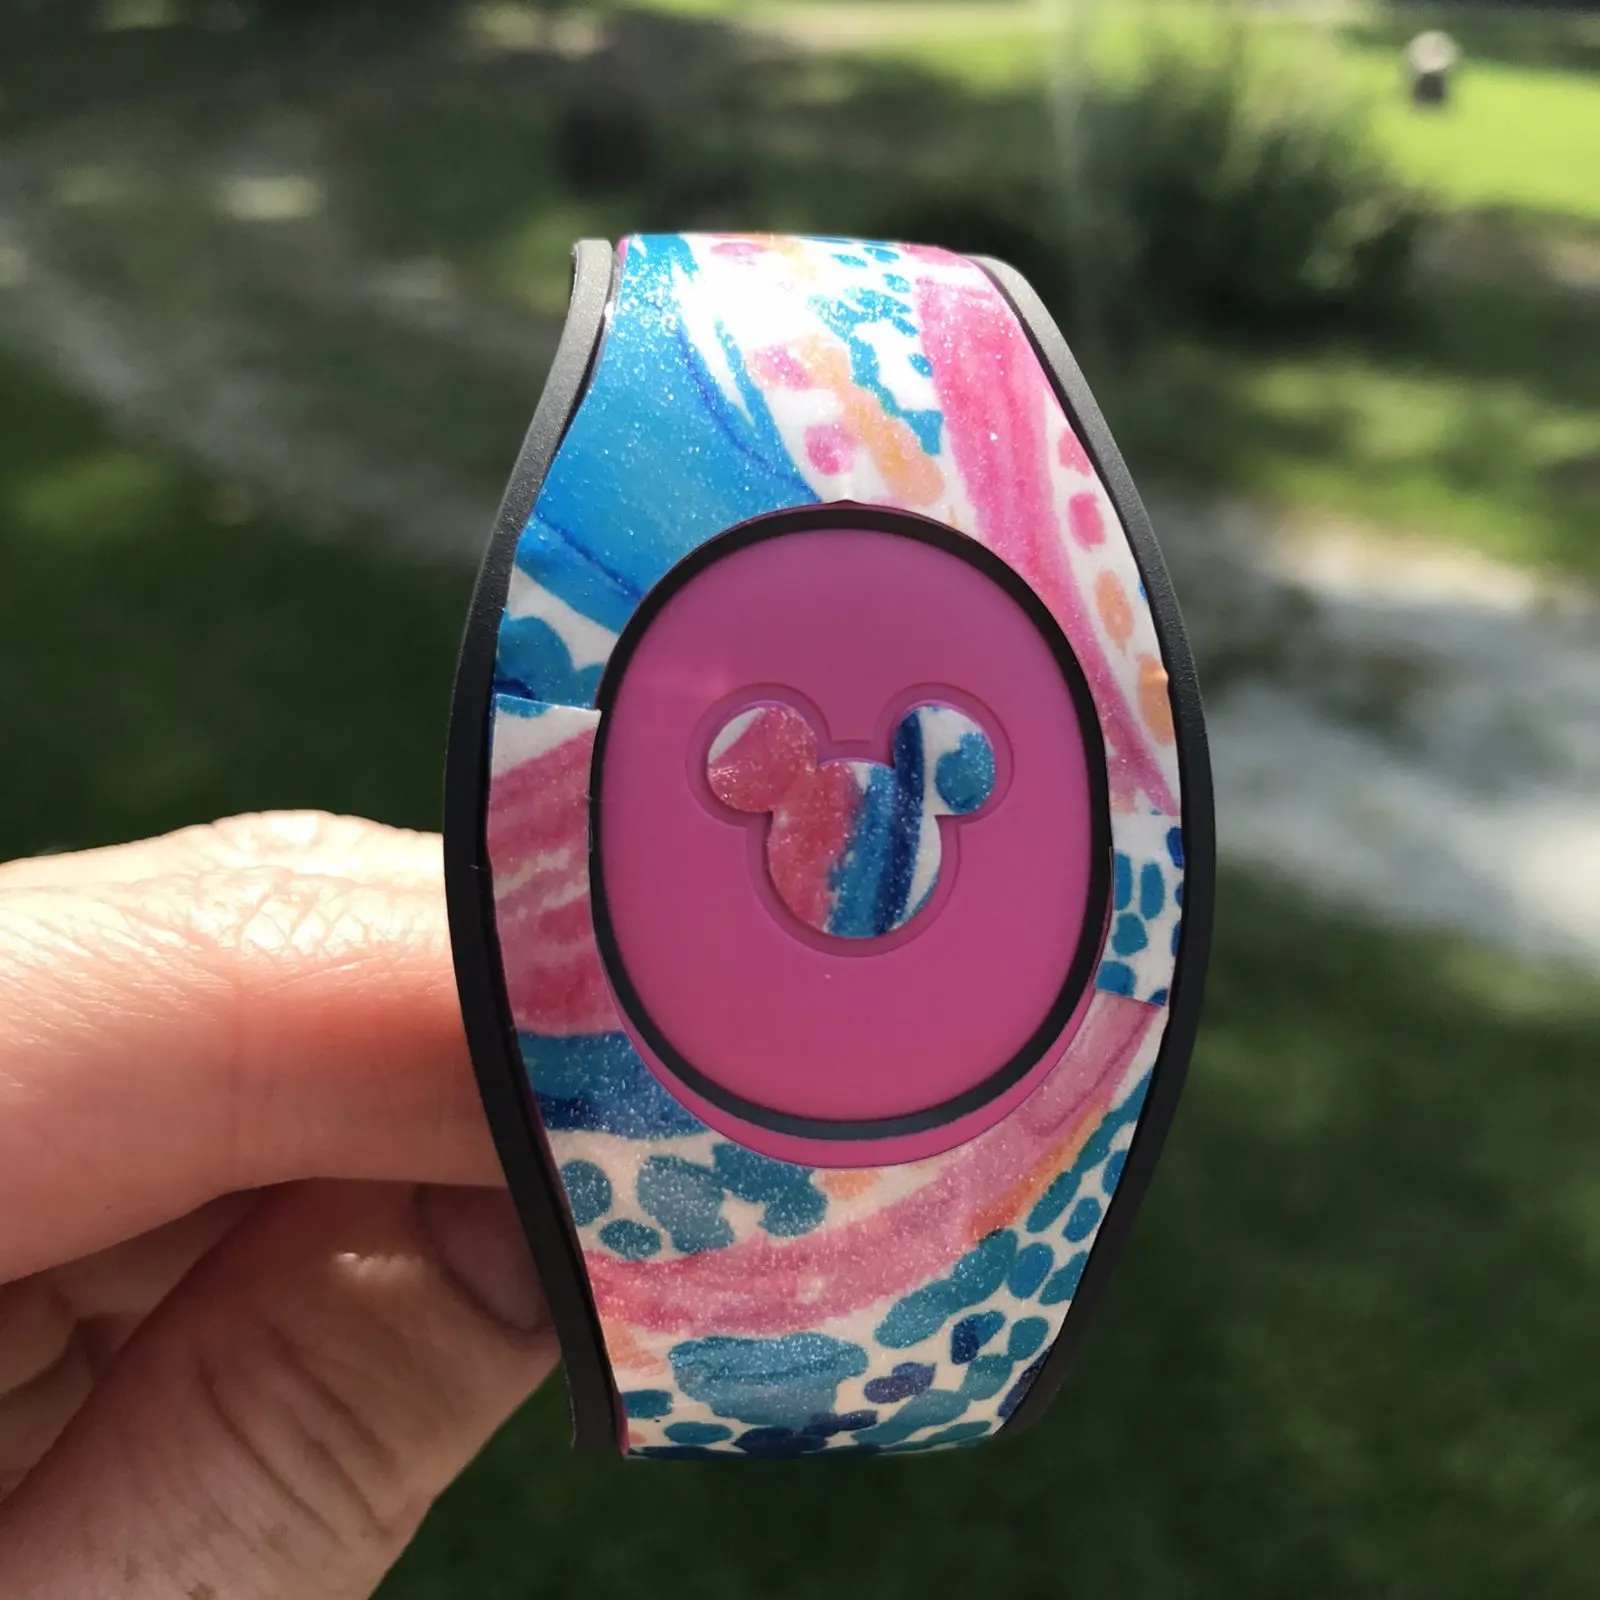 Polka Dots Decals for MagicBand 2 or MagicBand, Minnie Mouse Style Vinyl  Sticker for Magic Band Straps